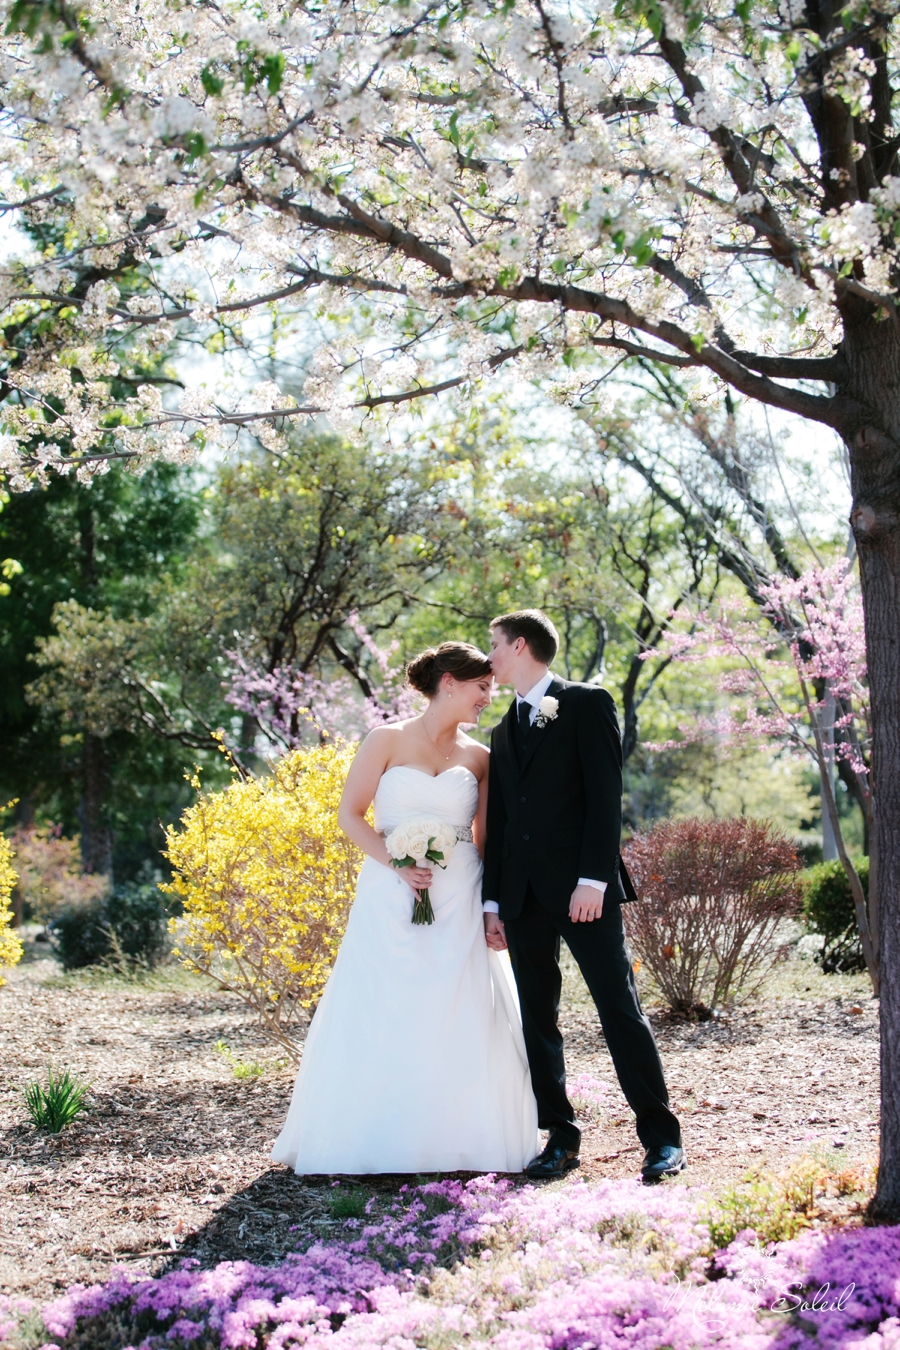 Twin Cities Church | spring wedding photos pink and white